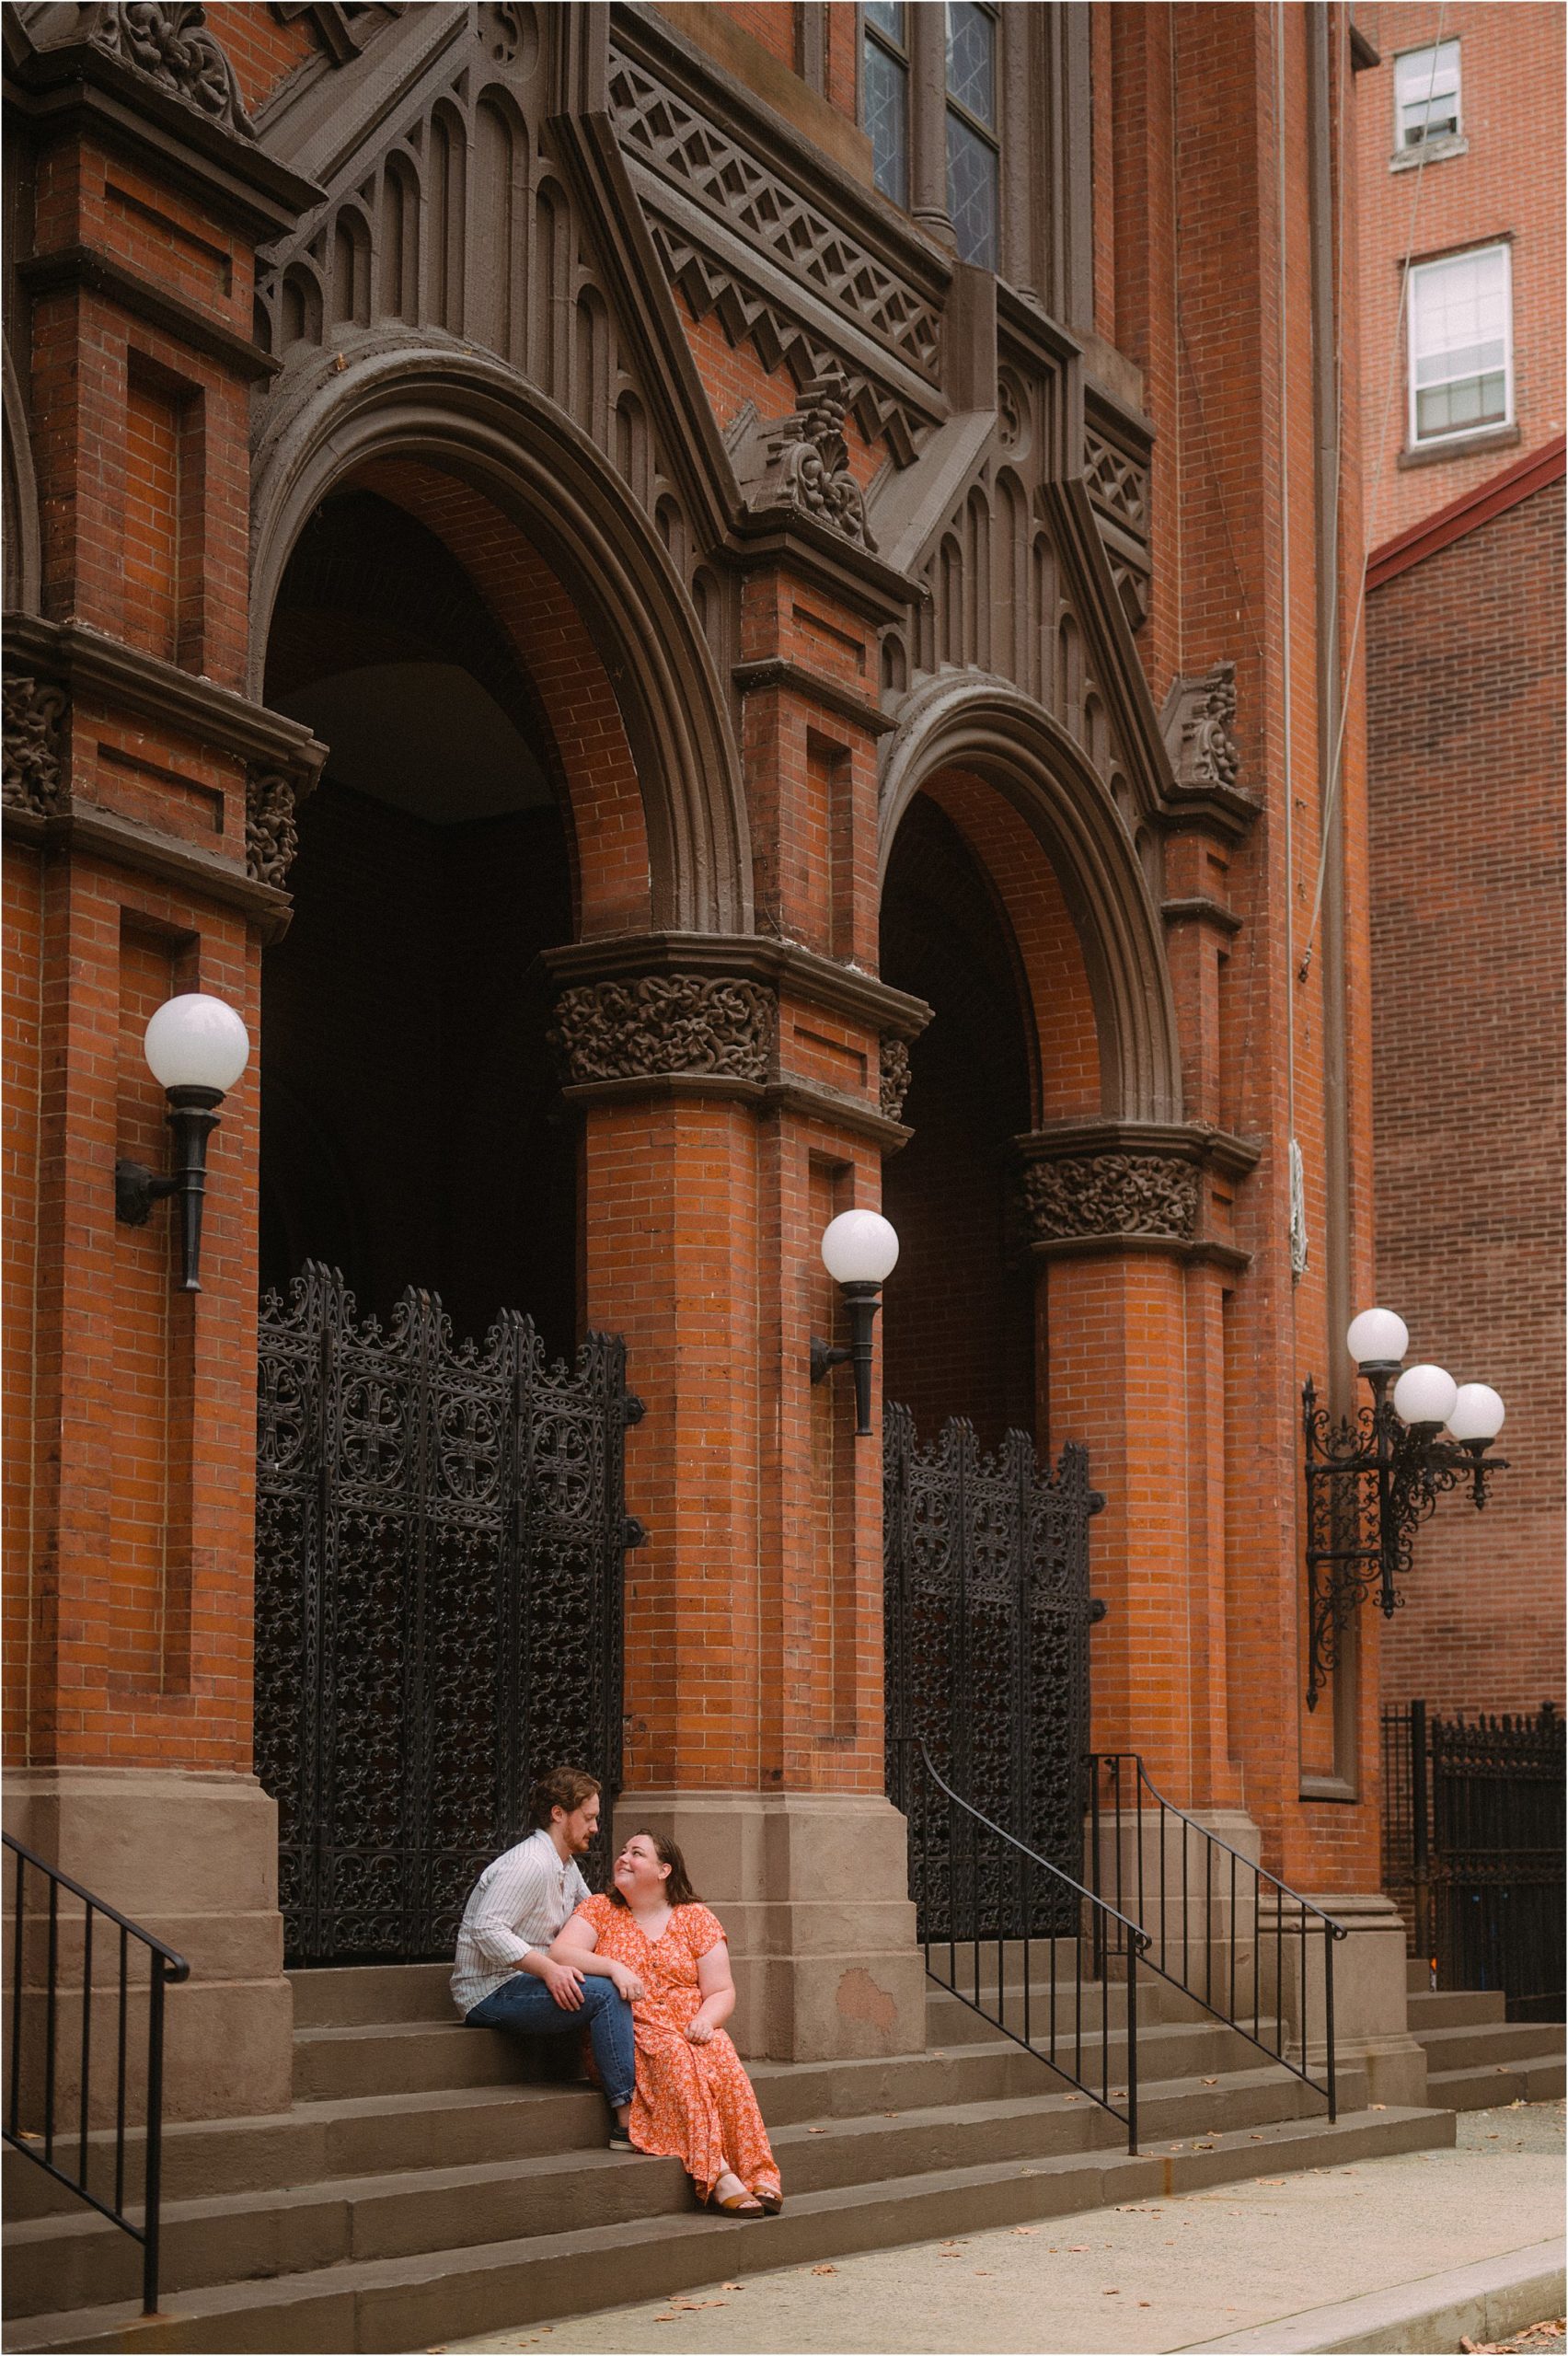 A man and woman sit on the steps of a brick building with black ironwork gates in the Rittenhouse neighborhood.